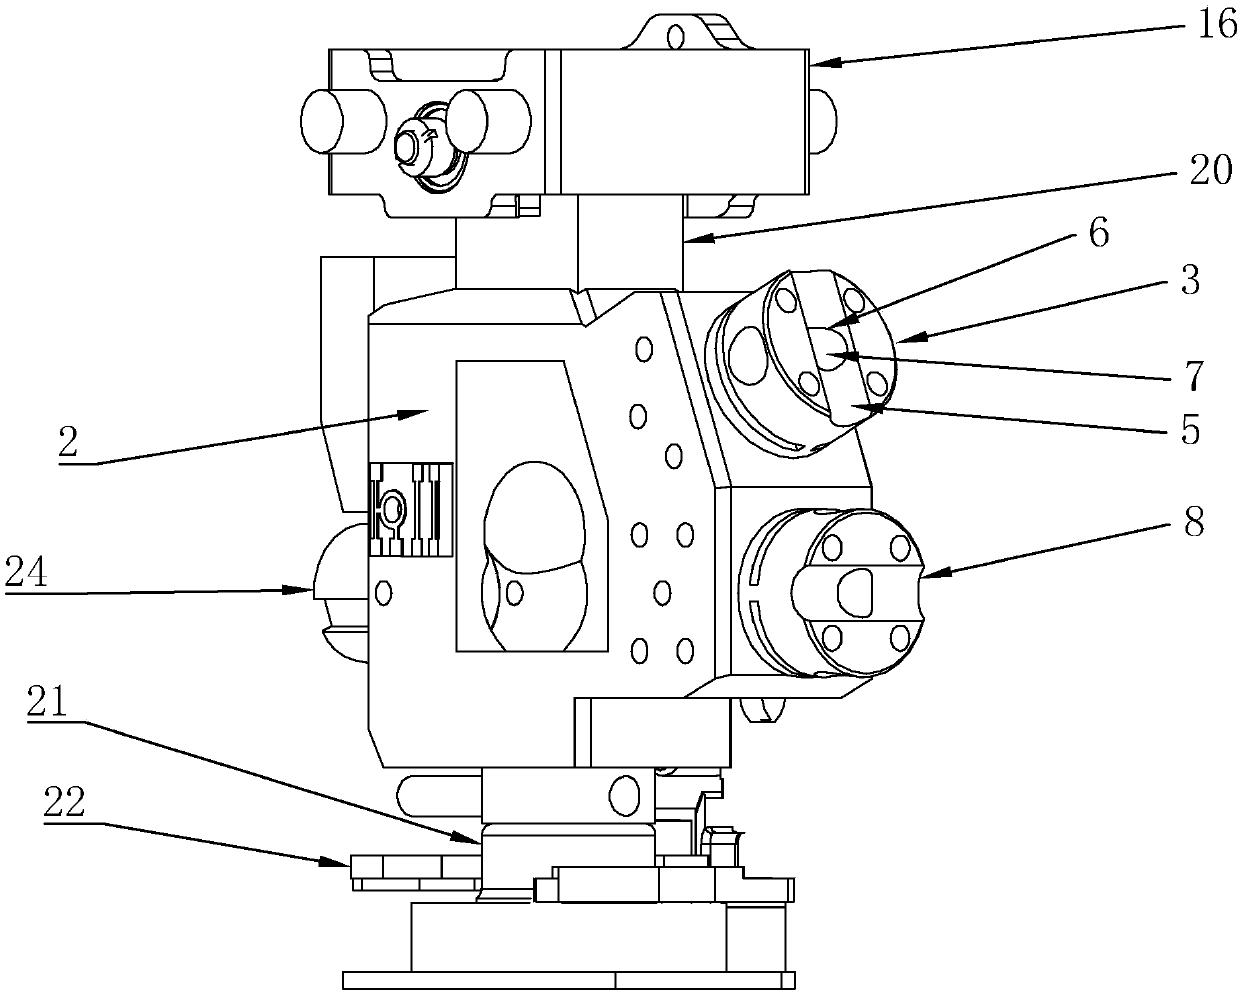 Cross-shaped projecting laser instrument